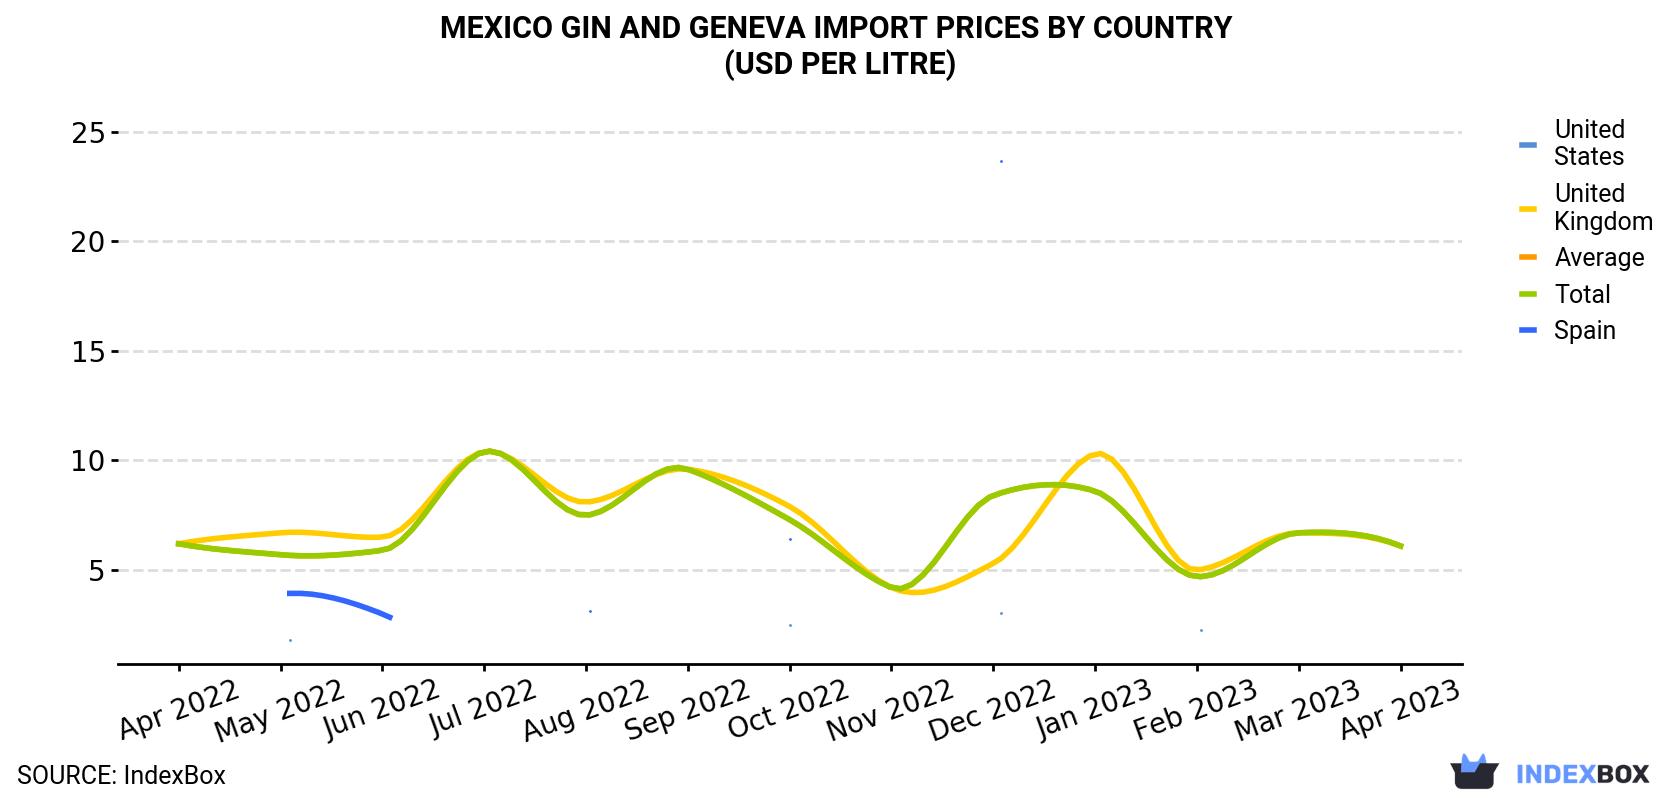 Mexico Gin And Geneva Import Prices By Country (USD Per Litre)